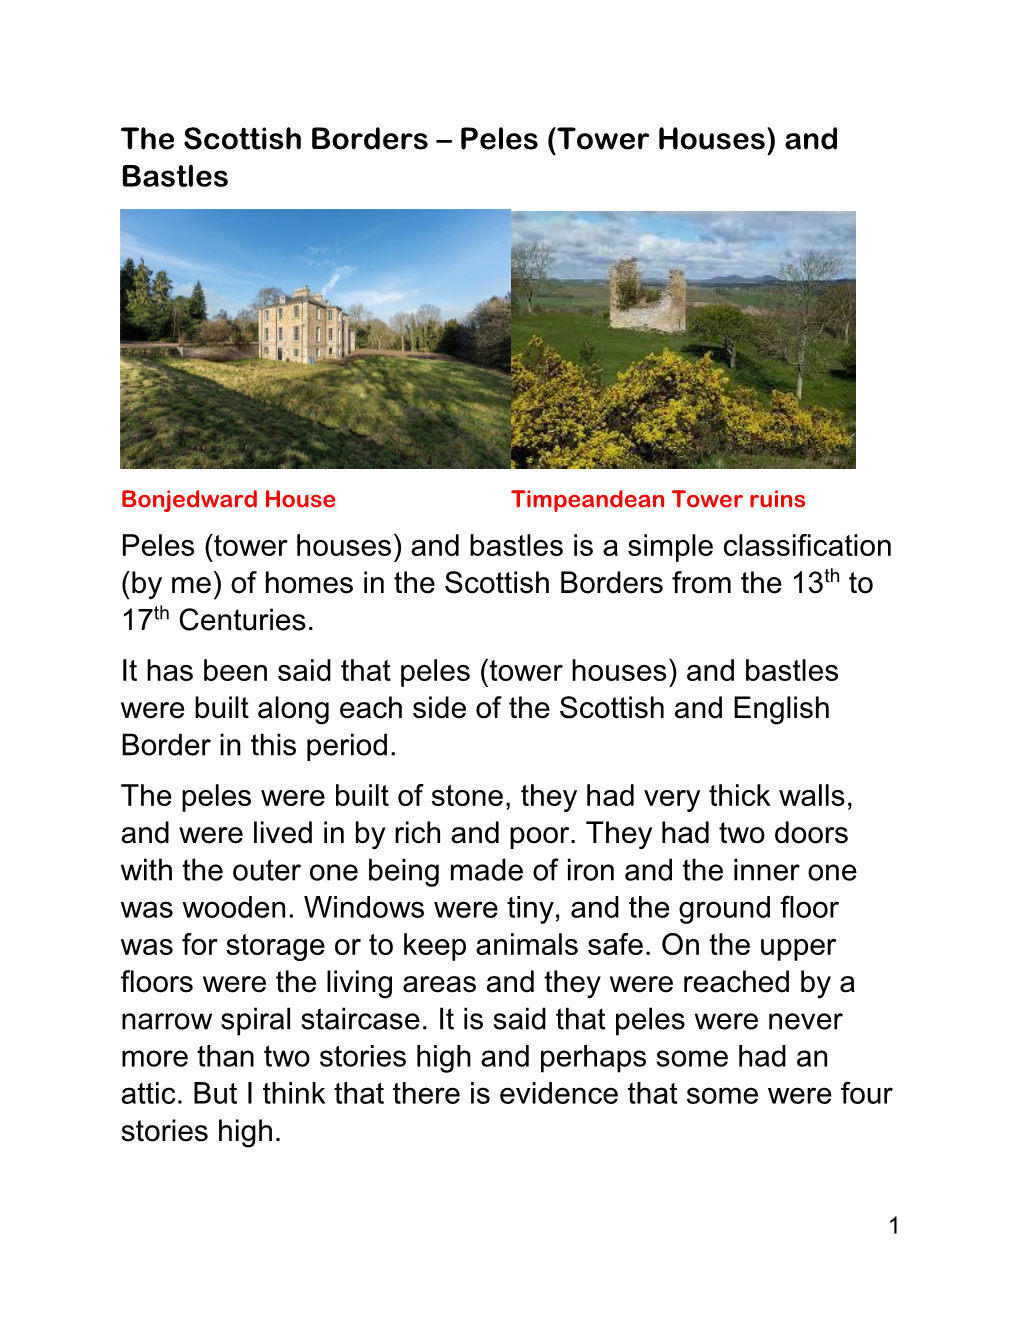 Peles, Towers and Bastles of the Scottish Borders